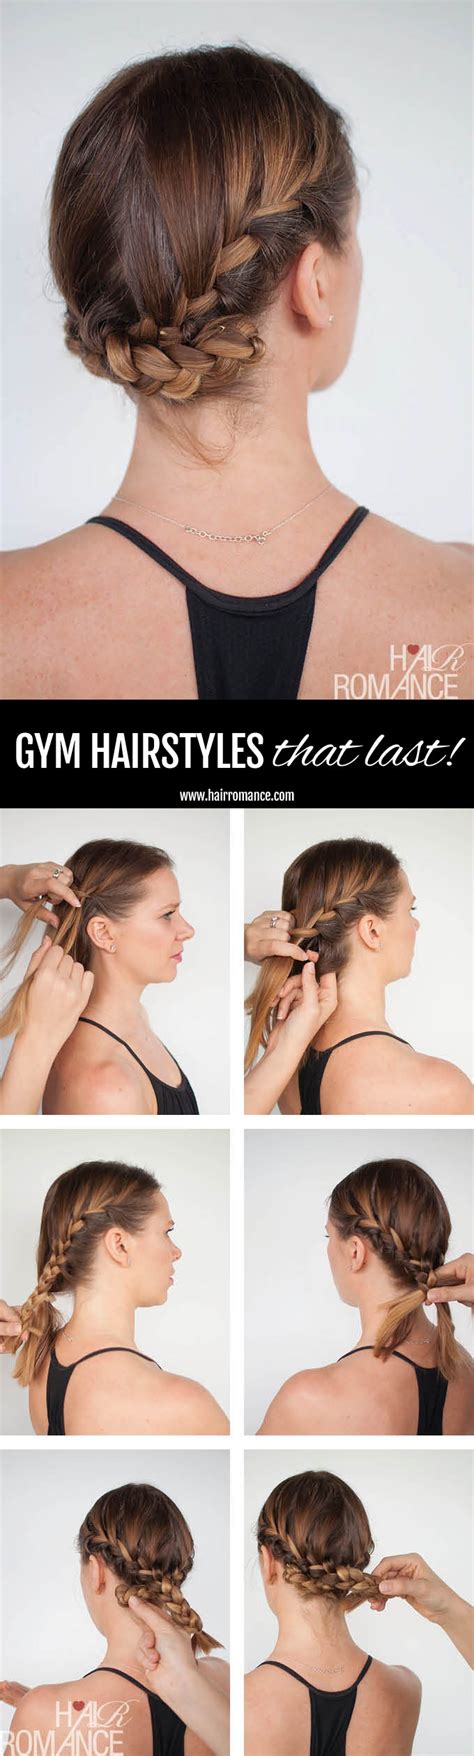 How To Look Good While You Workout 3 Long Lasting Hairstyle Tutorials You Can Wear All Day